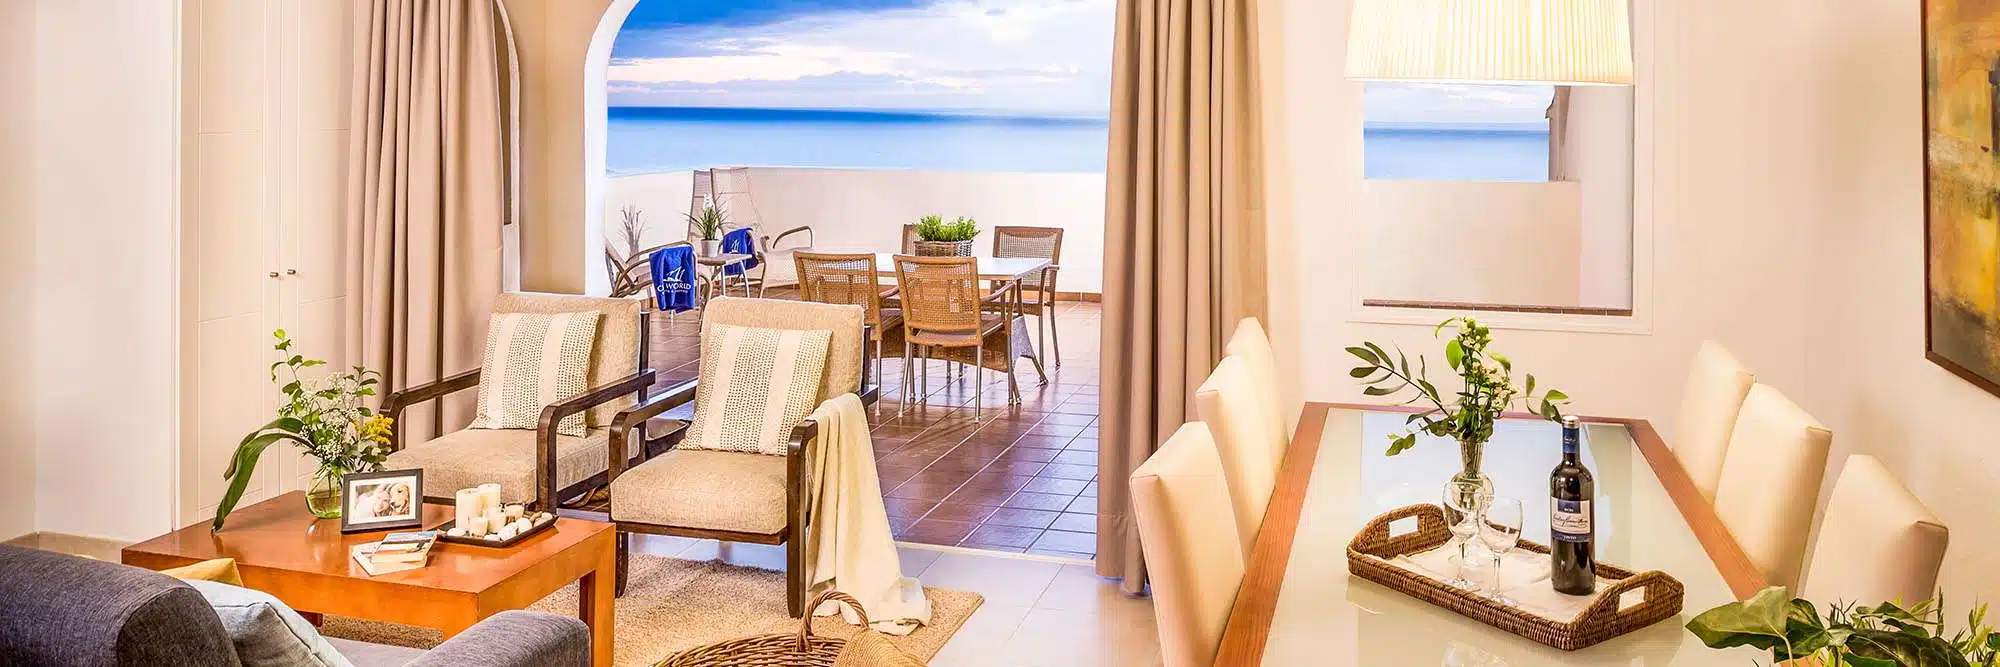 Relax and Indulge at Monterey in Tenerife